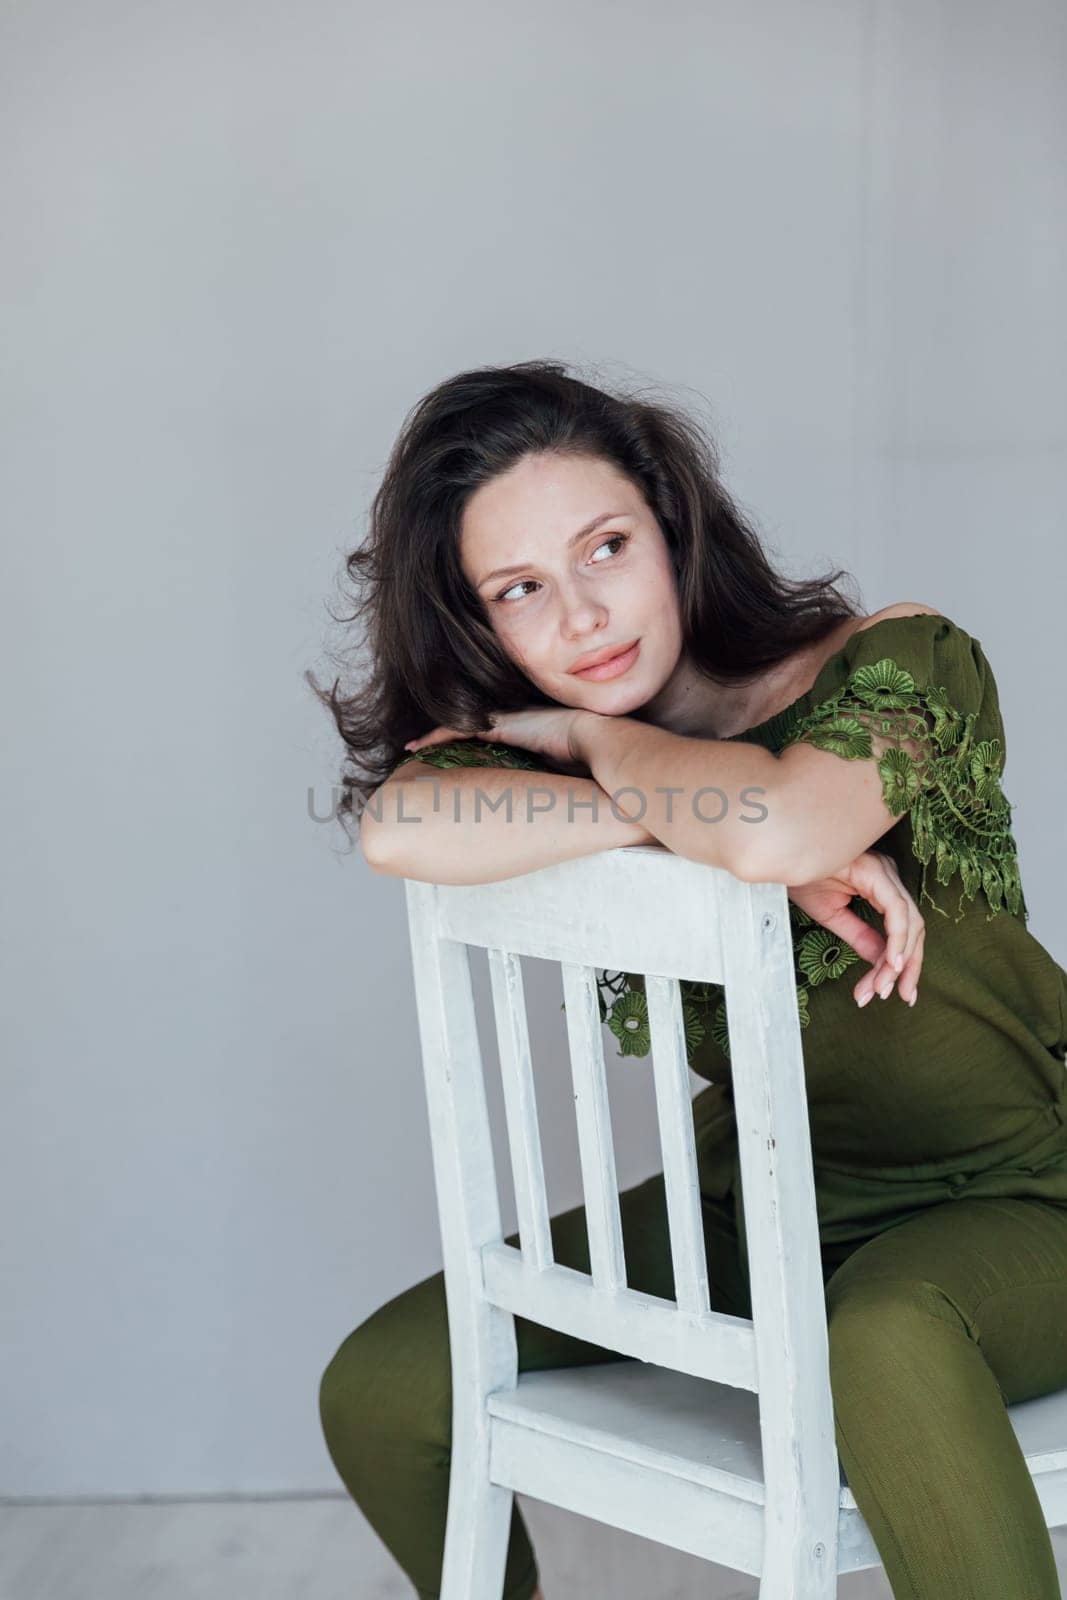 fashionable woman sits on a white chair and poses on a gray background